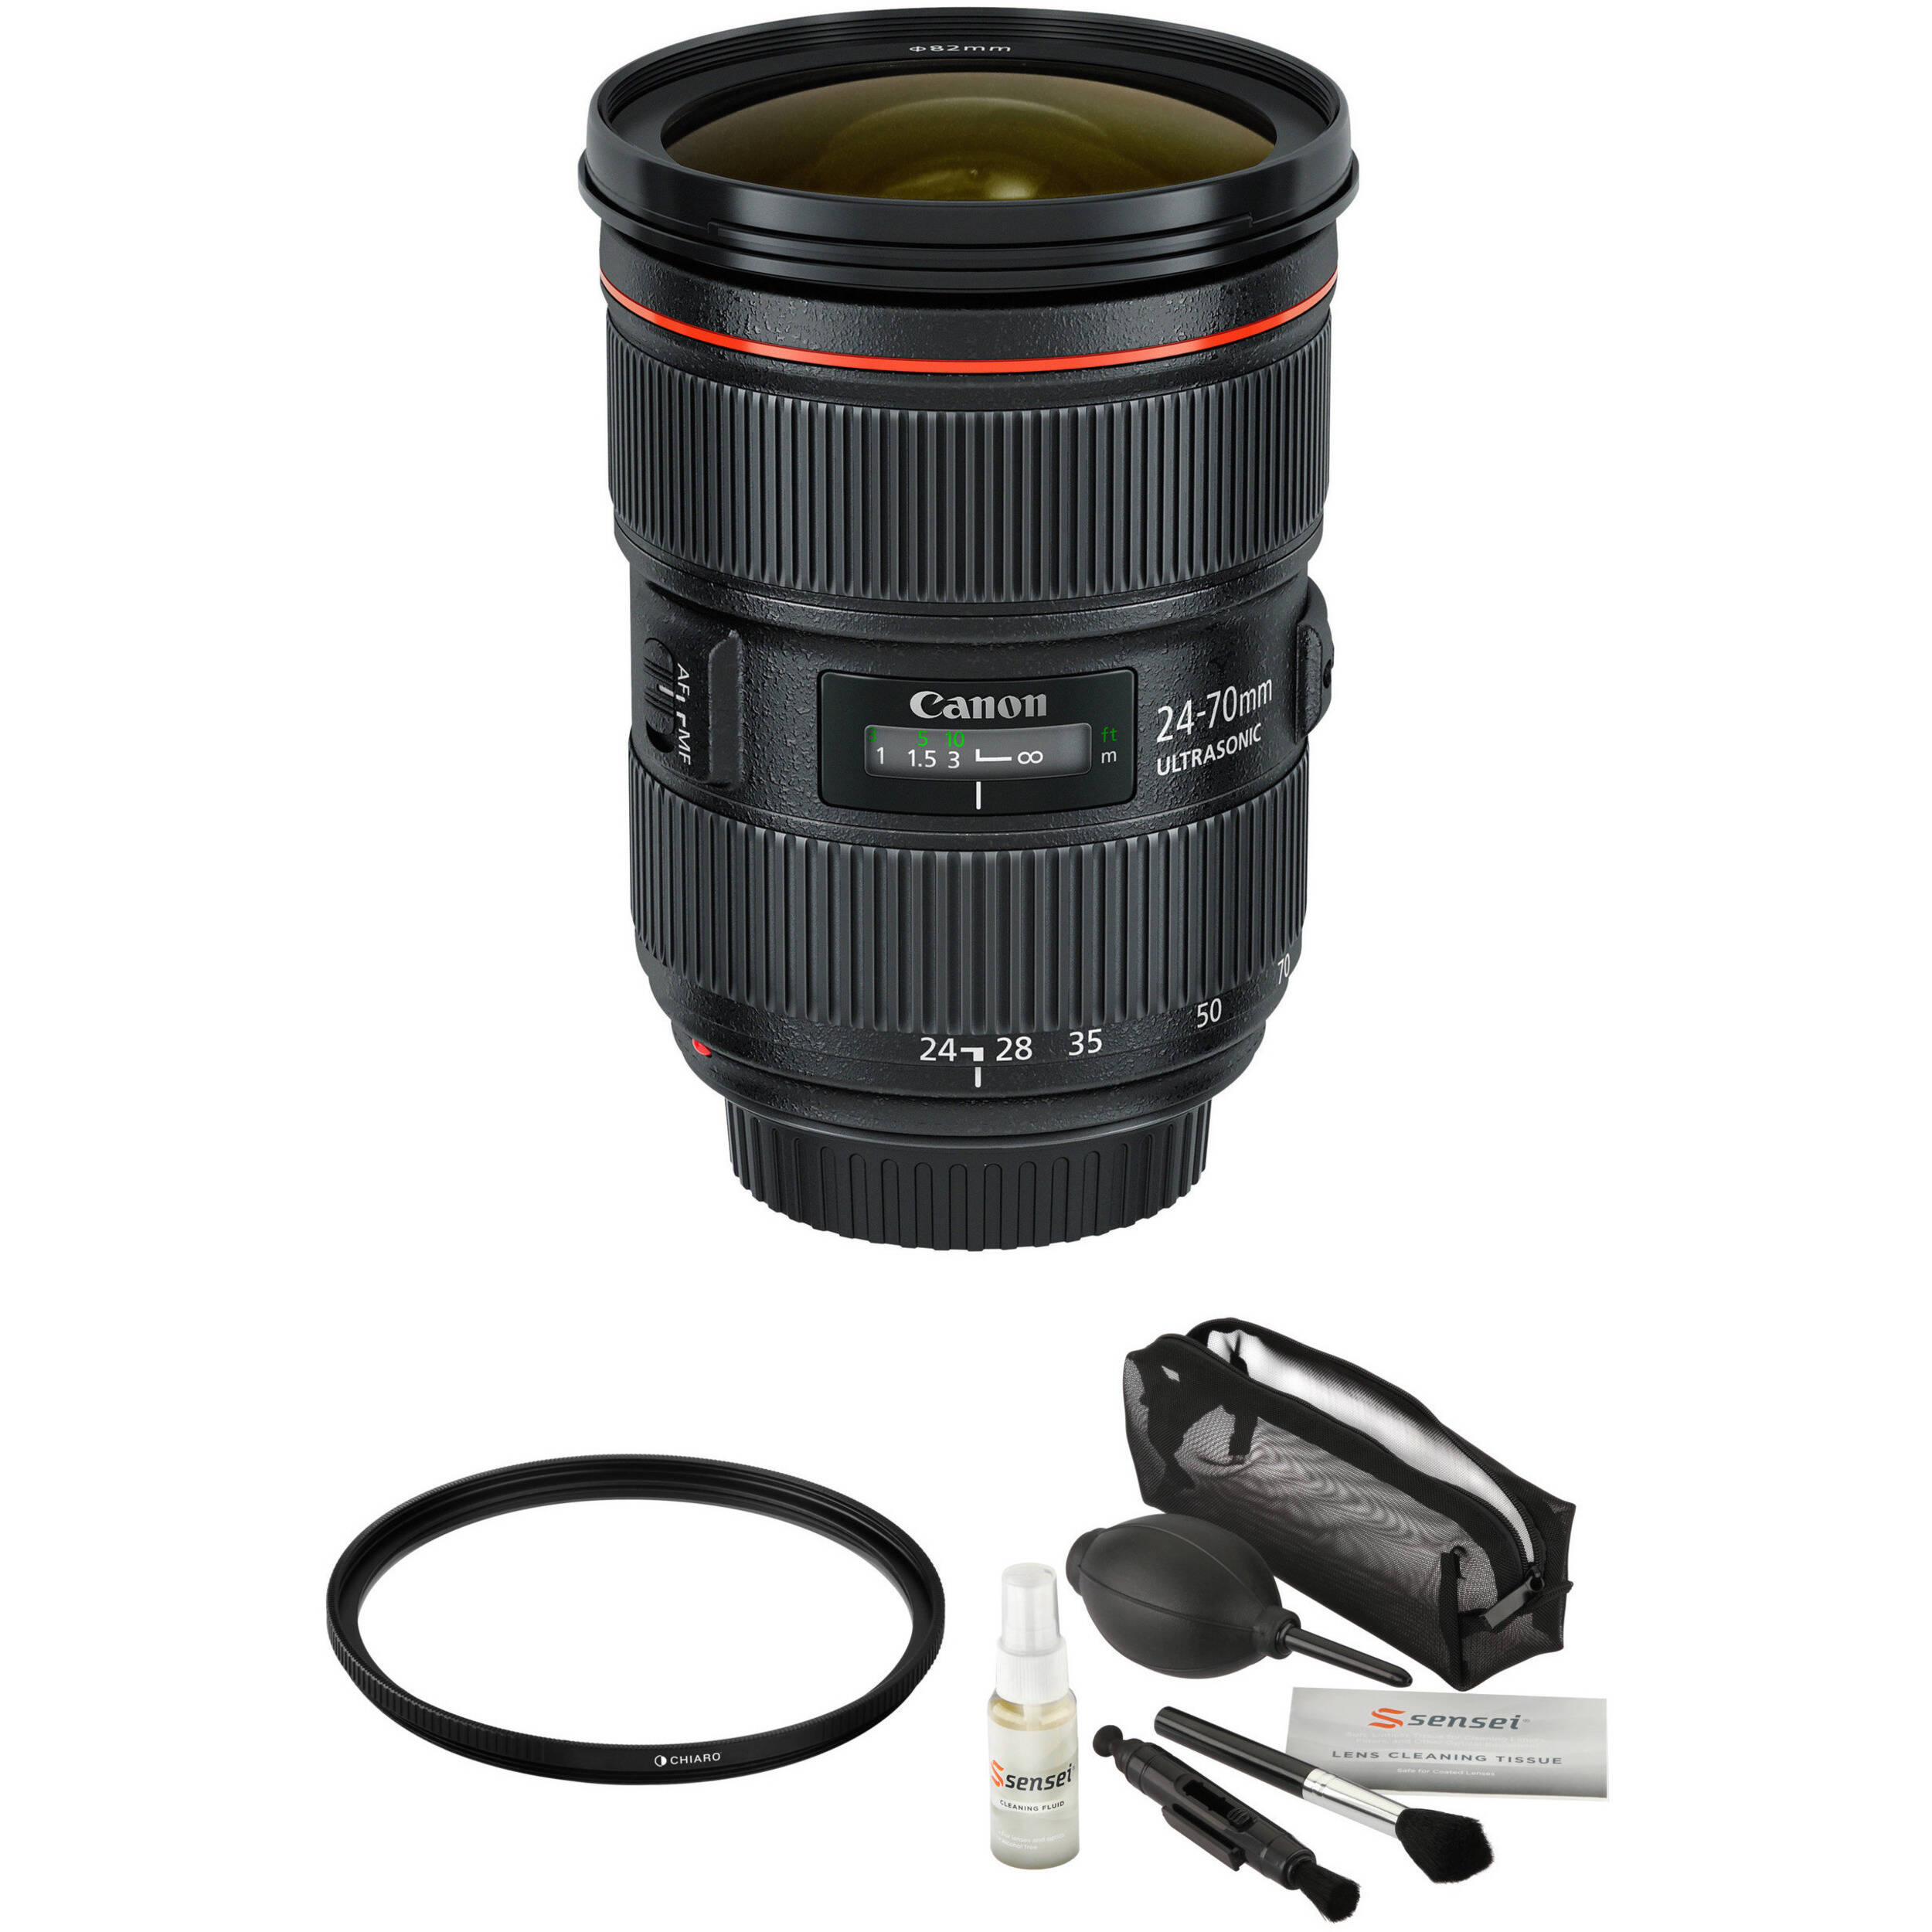 Canon Ef 24 70mm F 2 8l Ii Usm Lens With Accessories Kit B H